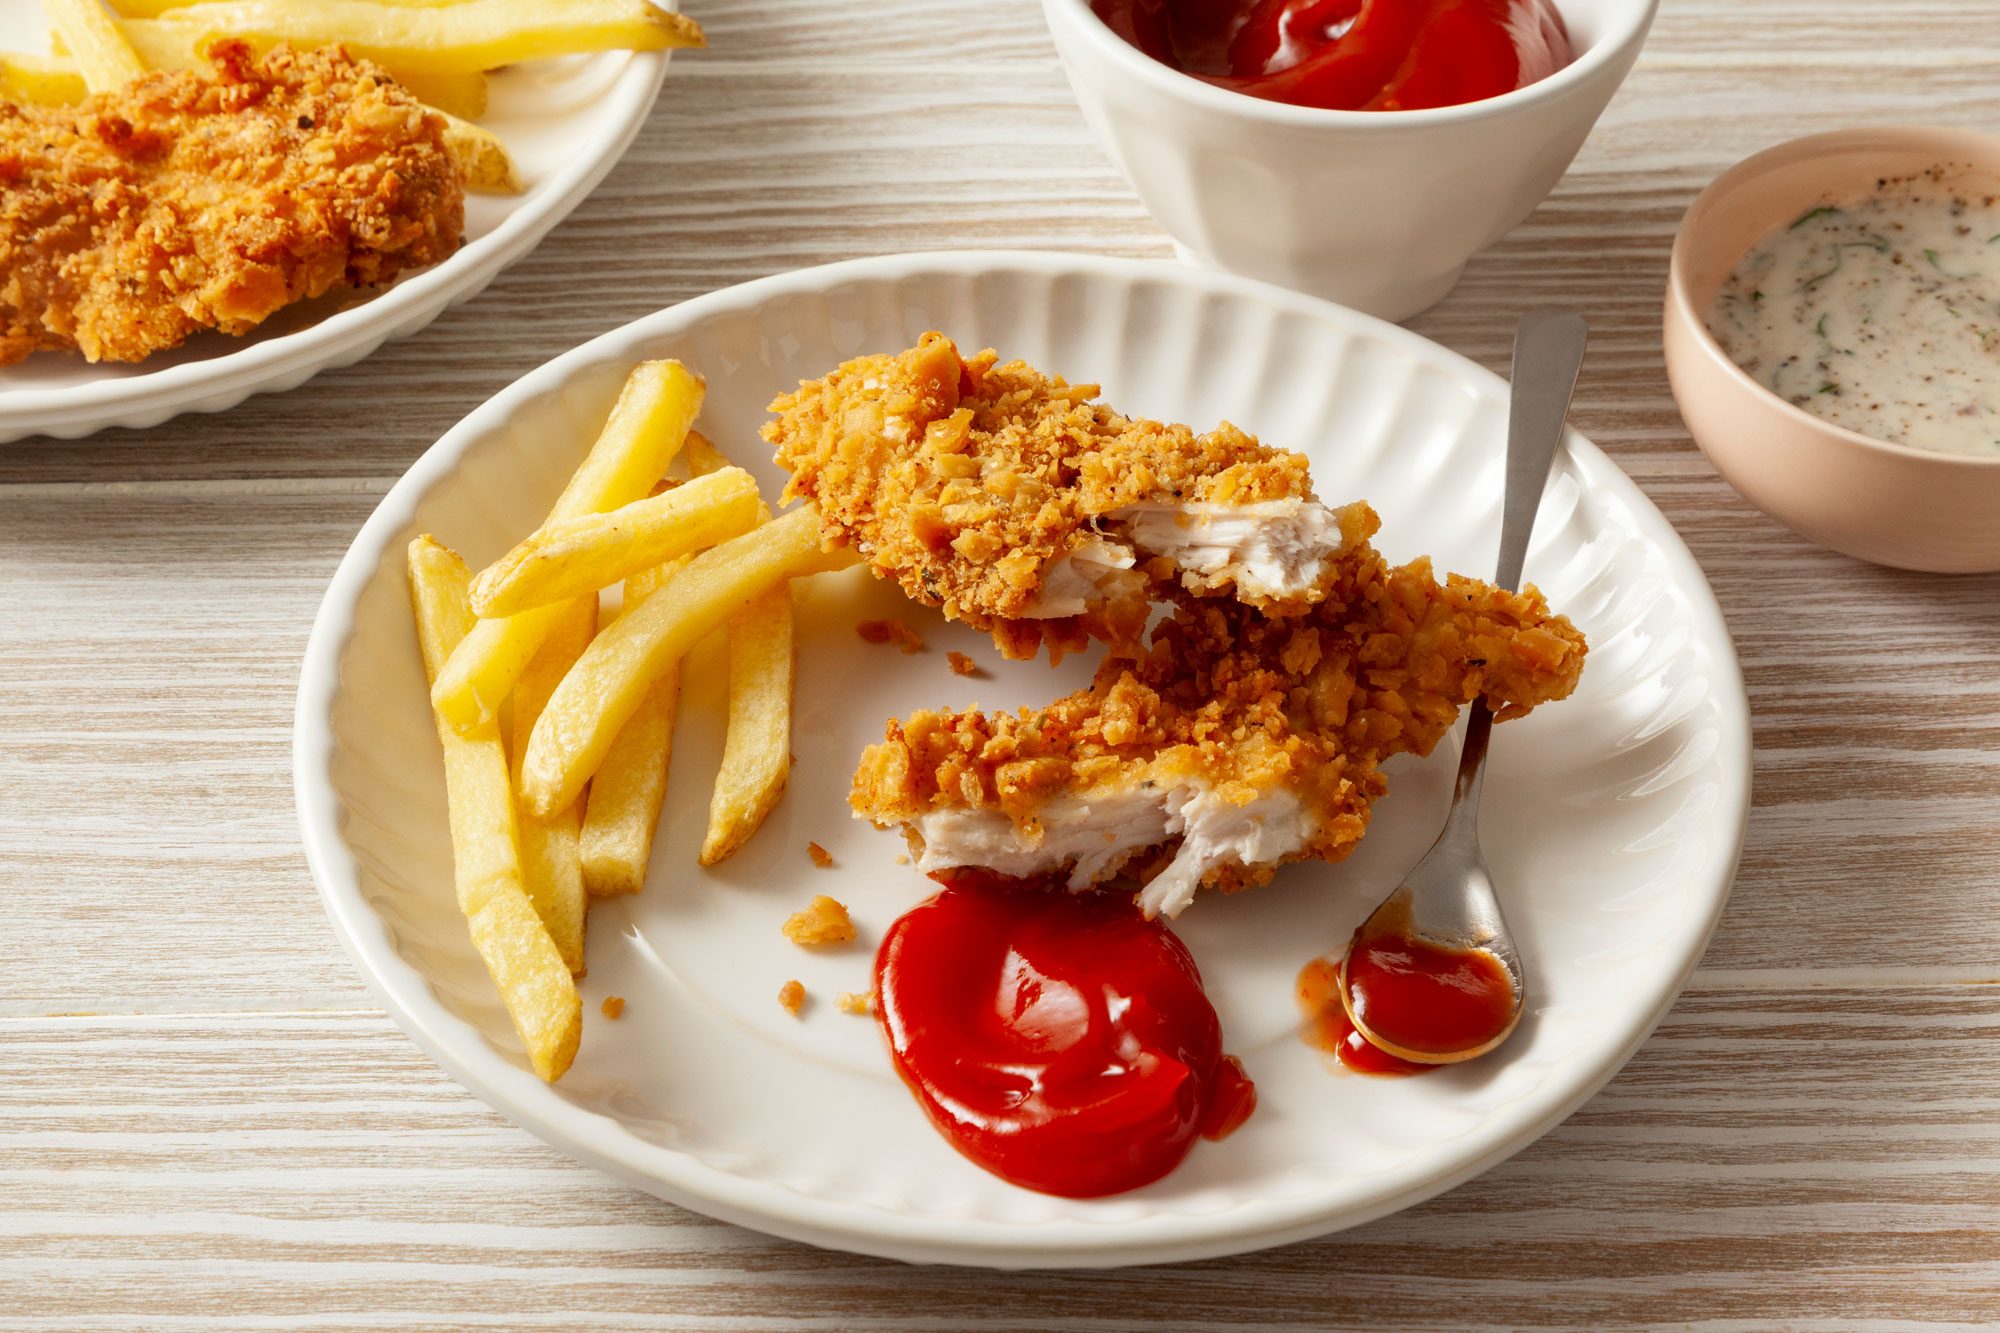 Fried Chicken Strips Served In A White Plate with Some French Fries and Tomato Ketchup